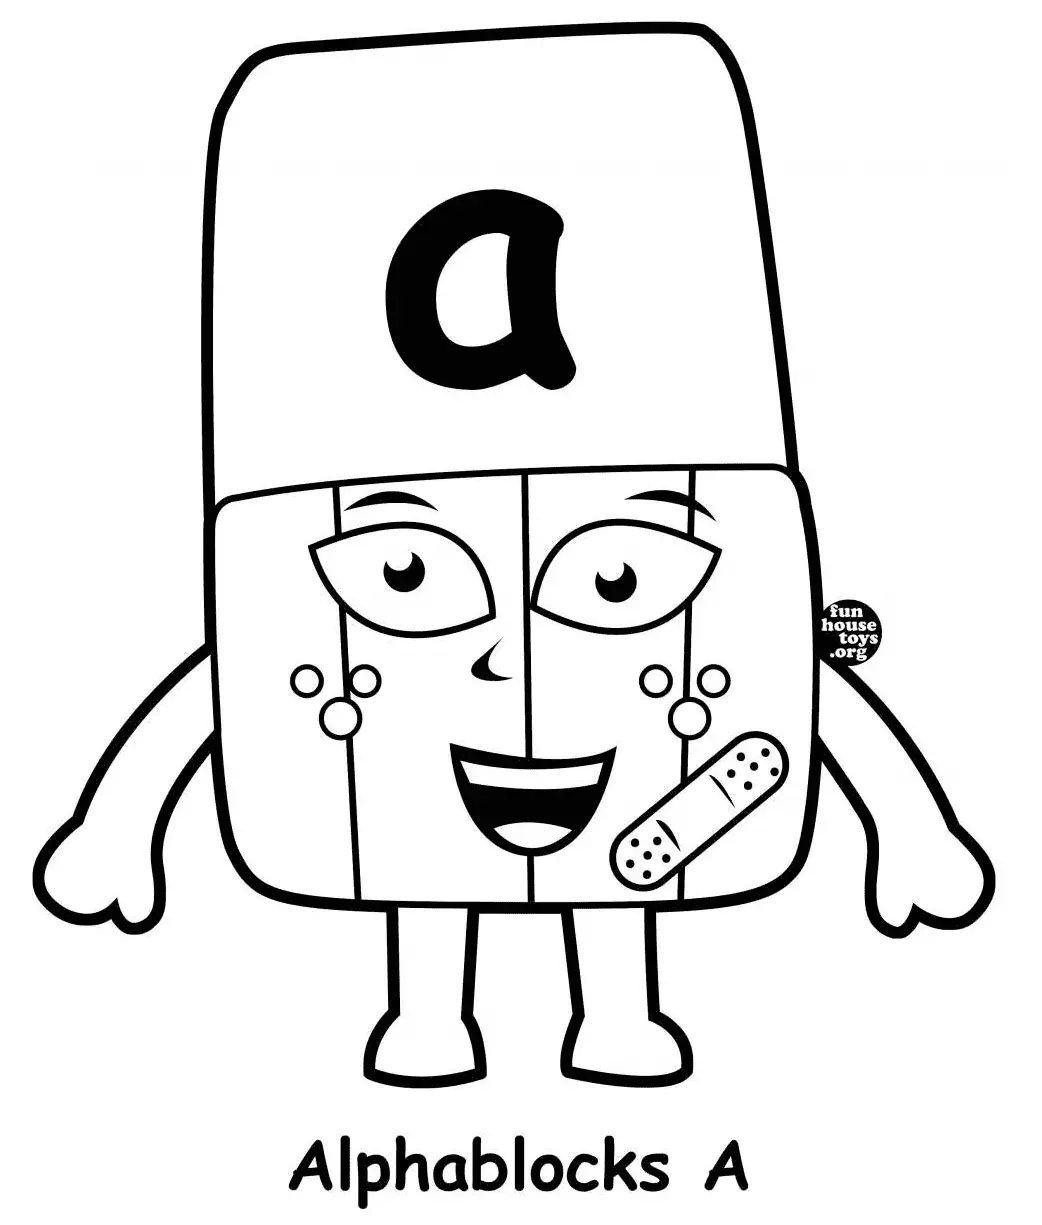 Let's Have Fun with Alphablocks Coloring Pages Pdf - Alphablocks Letter A Coloring Pages